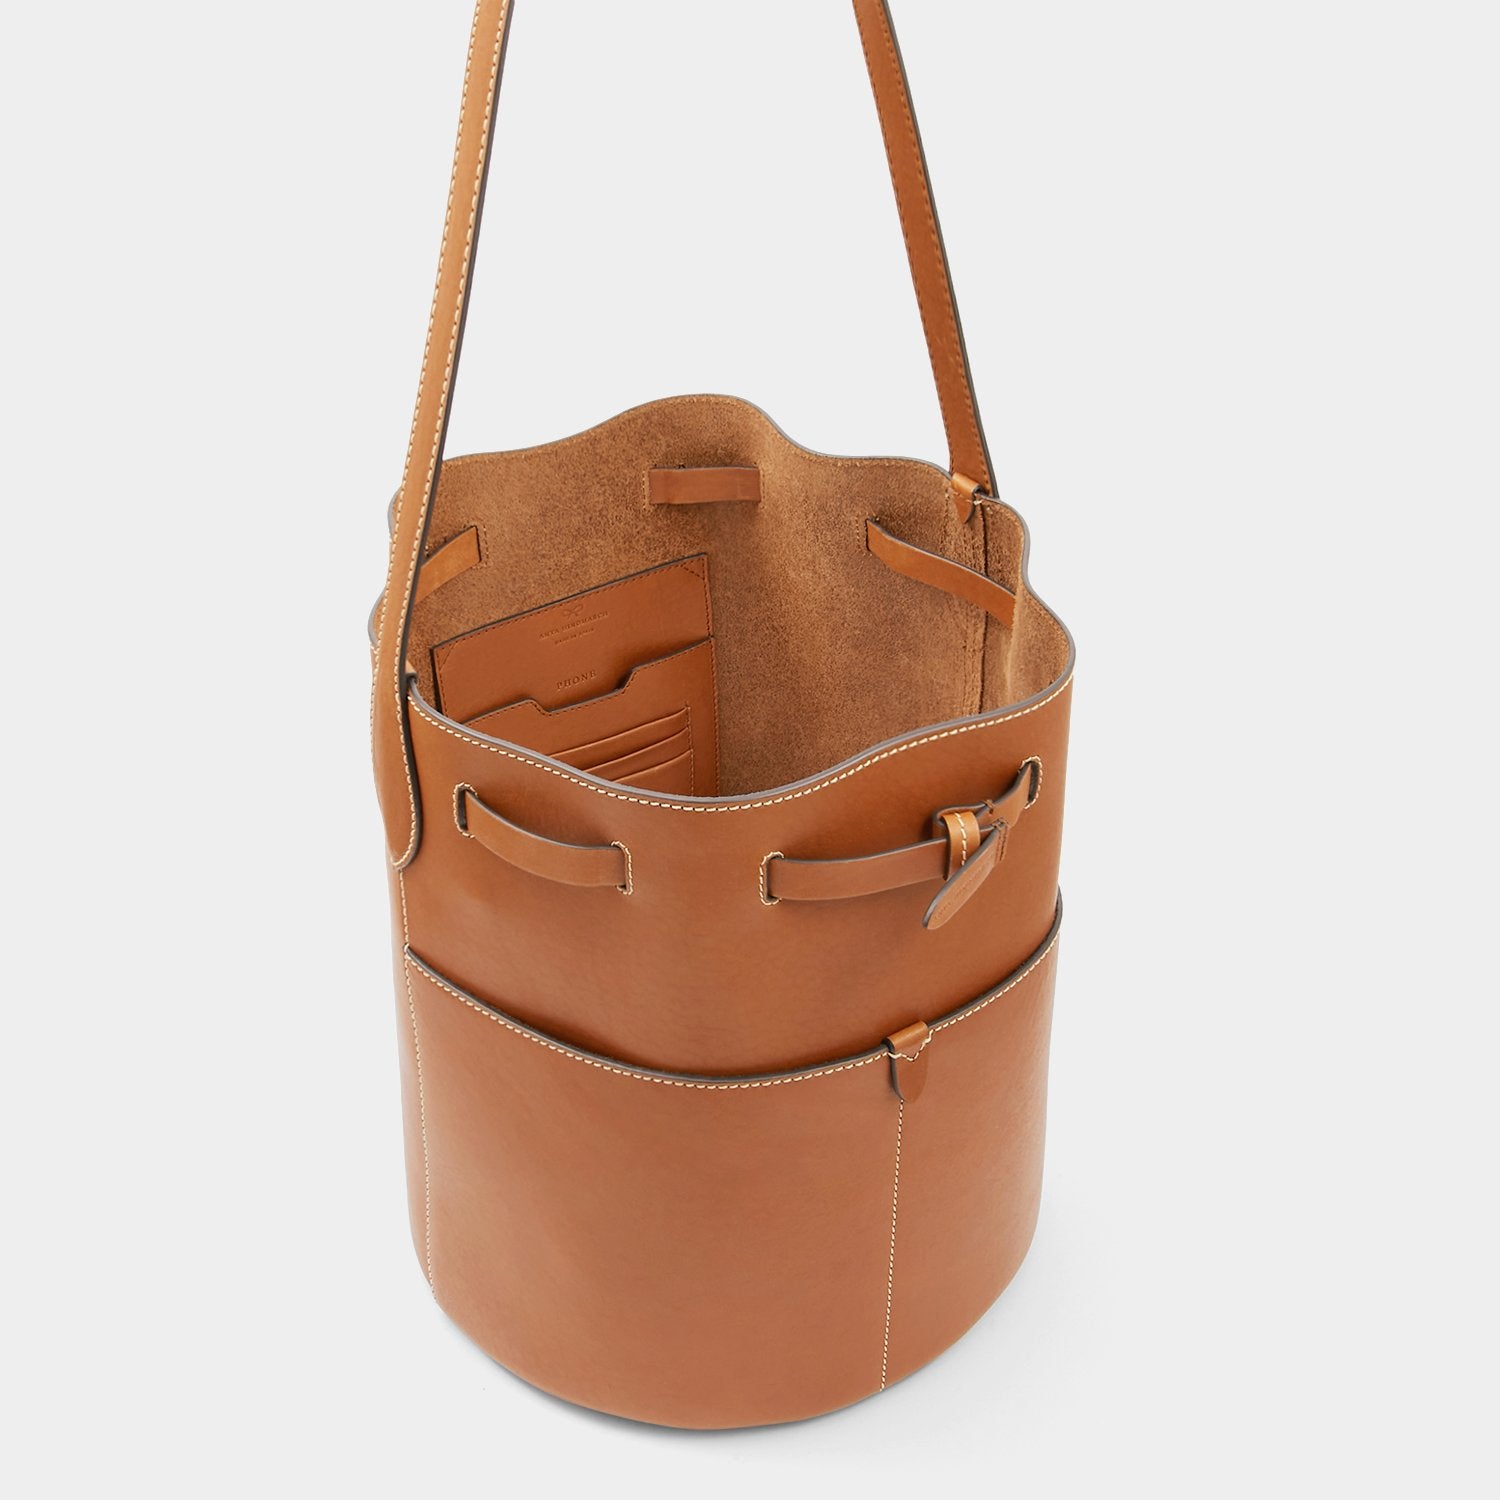 「Return to Nature」バケットバッグ -

                  
                    Compostable Leather in Tan -
                  

                  Anya Hindmarch JP
